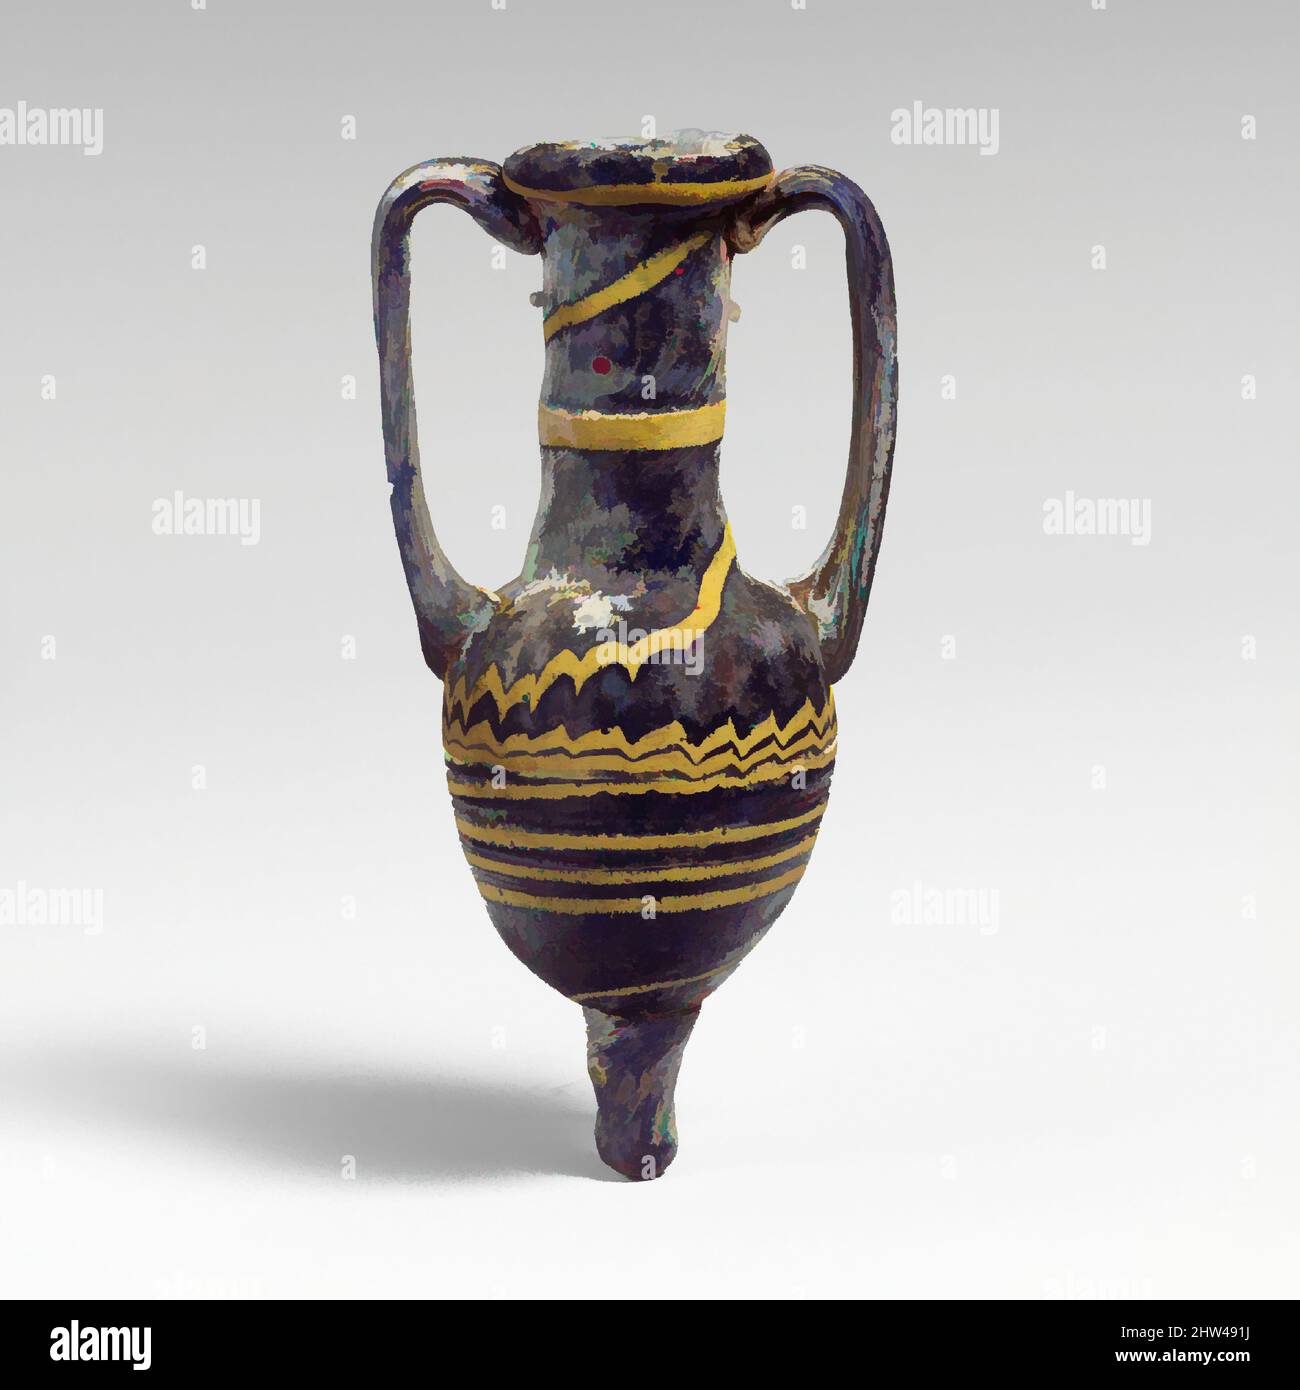 Art inspired by Glass amphoriskos (perfume bottle), Hellenistic, 3rd–2nd century B.C., Greek, Eastern Mediterranean, Glass; core-formed, Group II, H.: 4 in. (10.2 cm), Glass, Translucent cobalt blue with same color handles and base-knob; trails in opaque yellow and opaque white, Classic works modernized by Artotop with a splash of modernity. Shapes, color and value, eye-catching visual impact on art. Emotions through freedom of artworks in a contemporary way. A timeless message pursuing a wildly creative new direction. Artists turning to the digital medium and creating the Artotop NFT Stock Photo